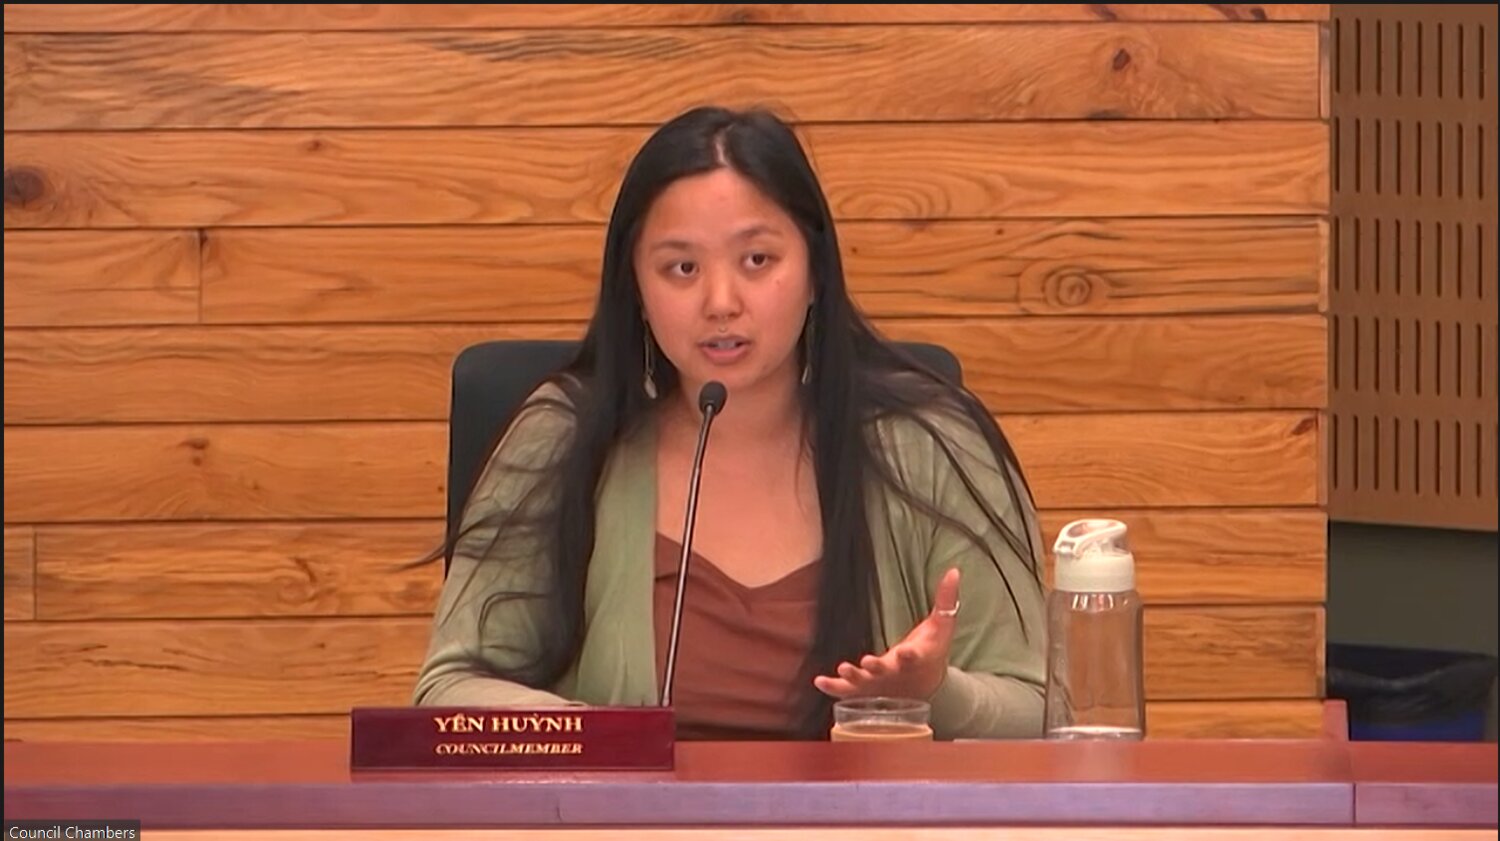 At the Olympia City Council meeting held Tuesday, May 16, 2023, Councilmember Yen Huynh recommended the appointment of nine individuals who will serve on the Cultural Access Advisory Board.